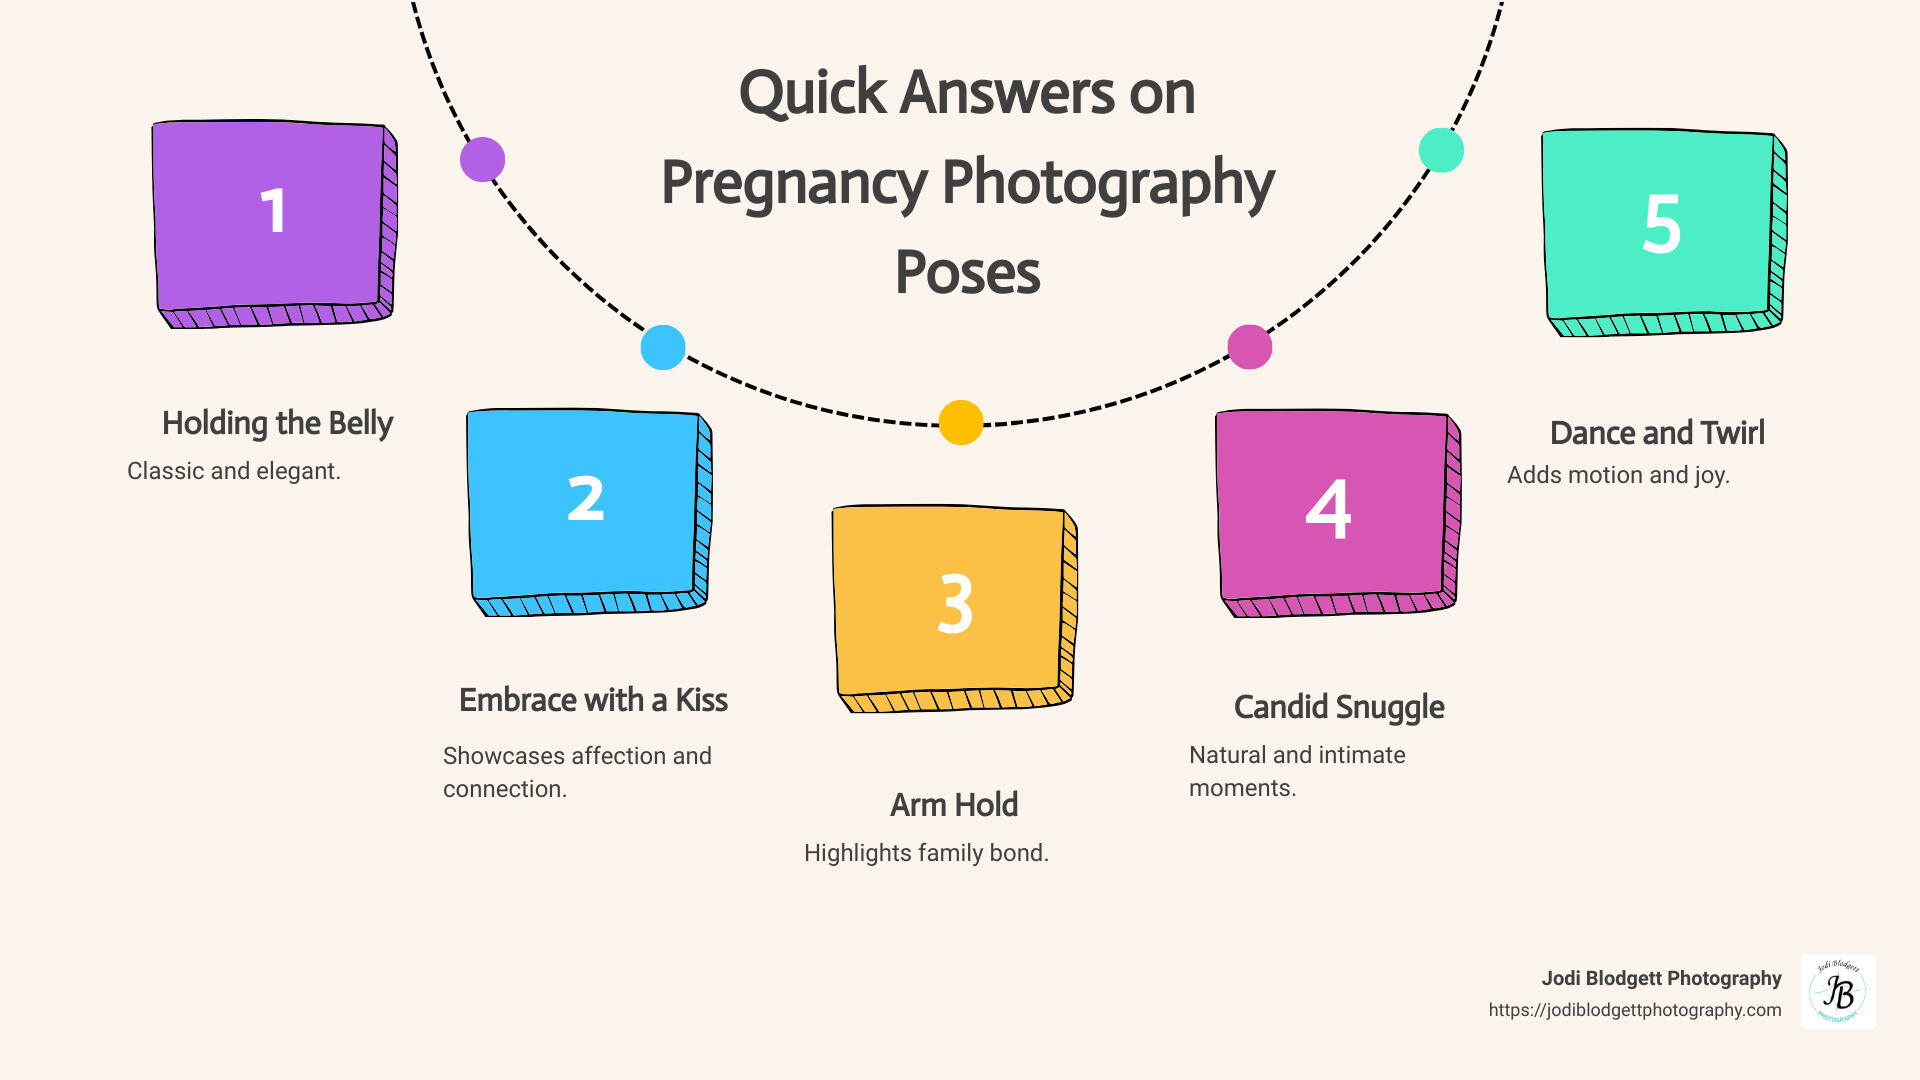 Pregnancy Photography Poses Infographic - pregnancy photography poses infographic process-5-steps-informal